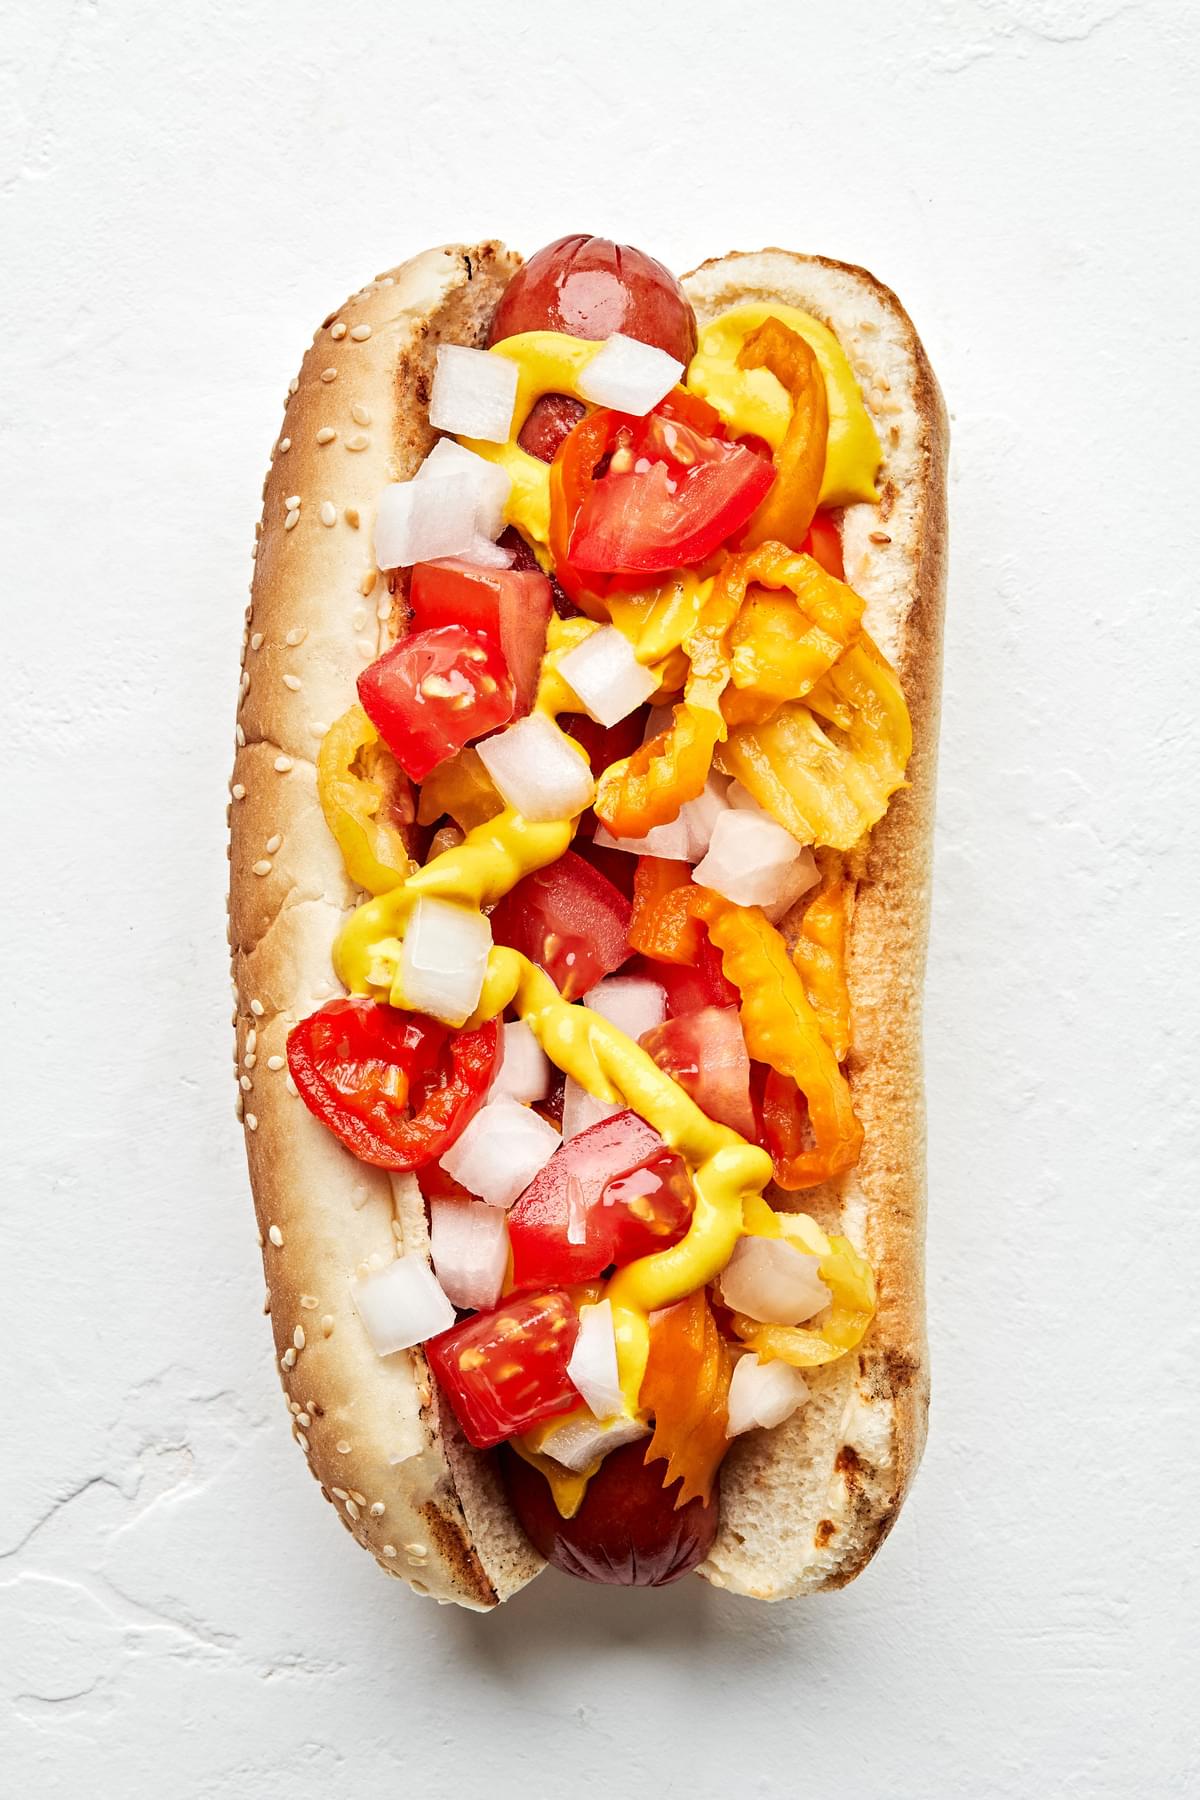 A Chicago dog topped with Pickled peppers, diced tomatoes, yellow mustard, and chopped onions.